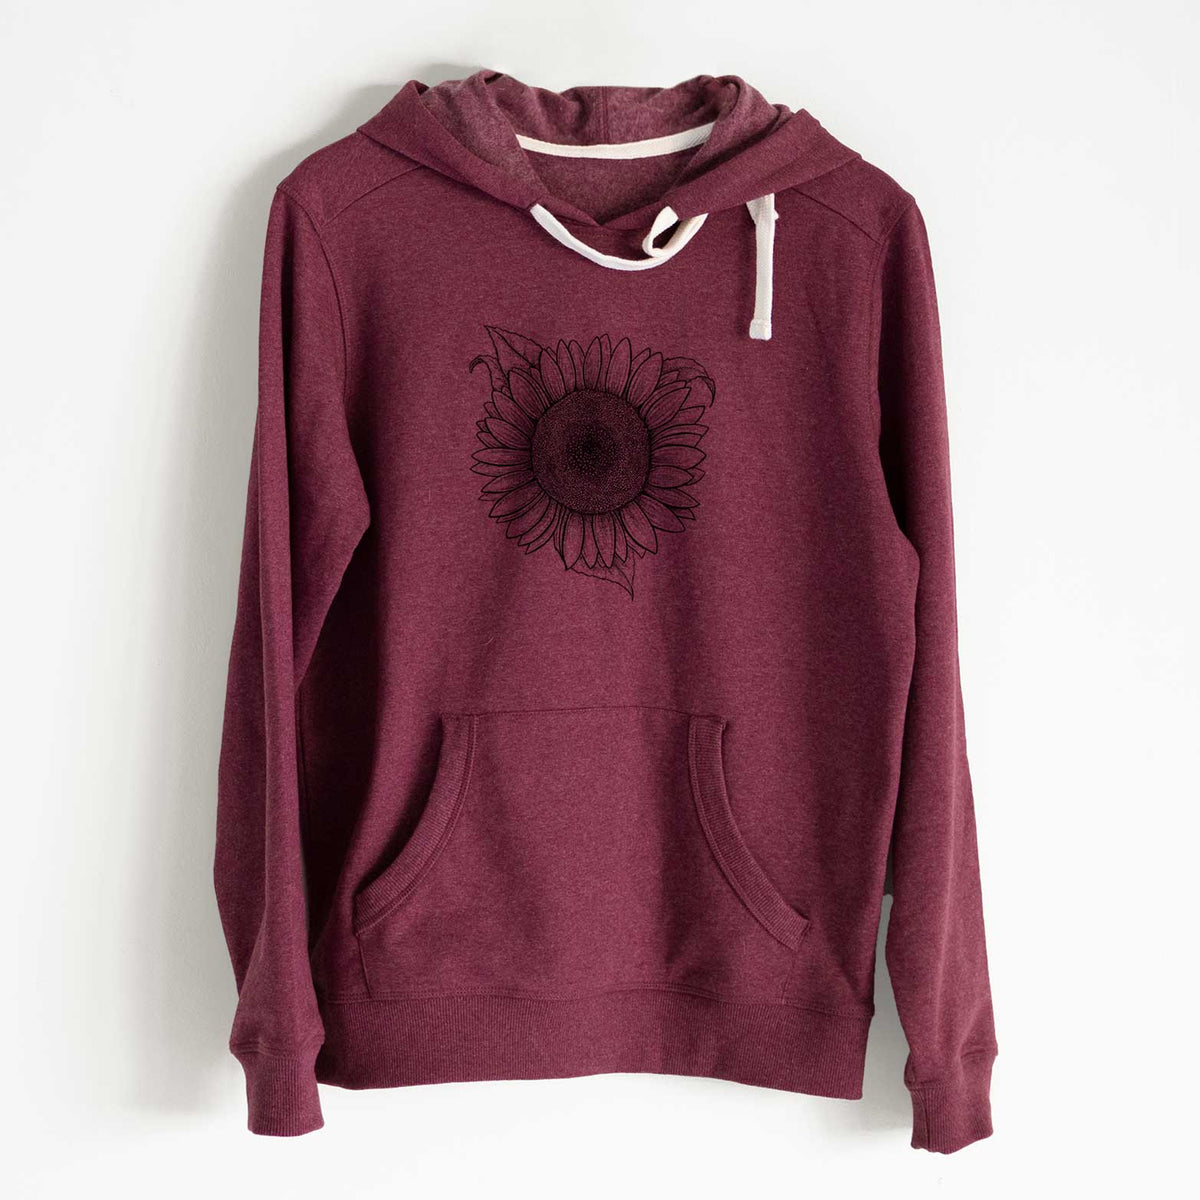 Lemon Queen Sunflower - Helianthus Annuus - Unisex Recycled Hoodie - CLOSEOUT - FINAL SALE